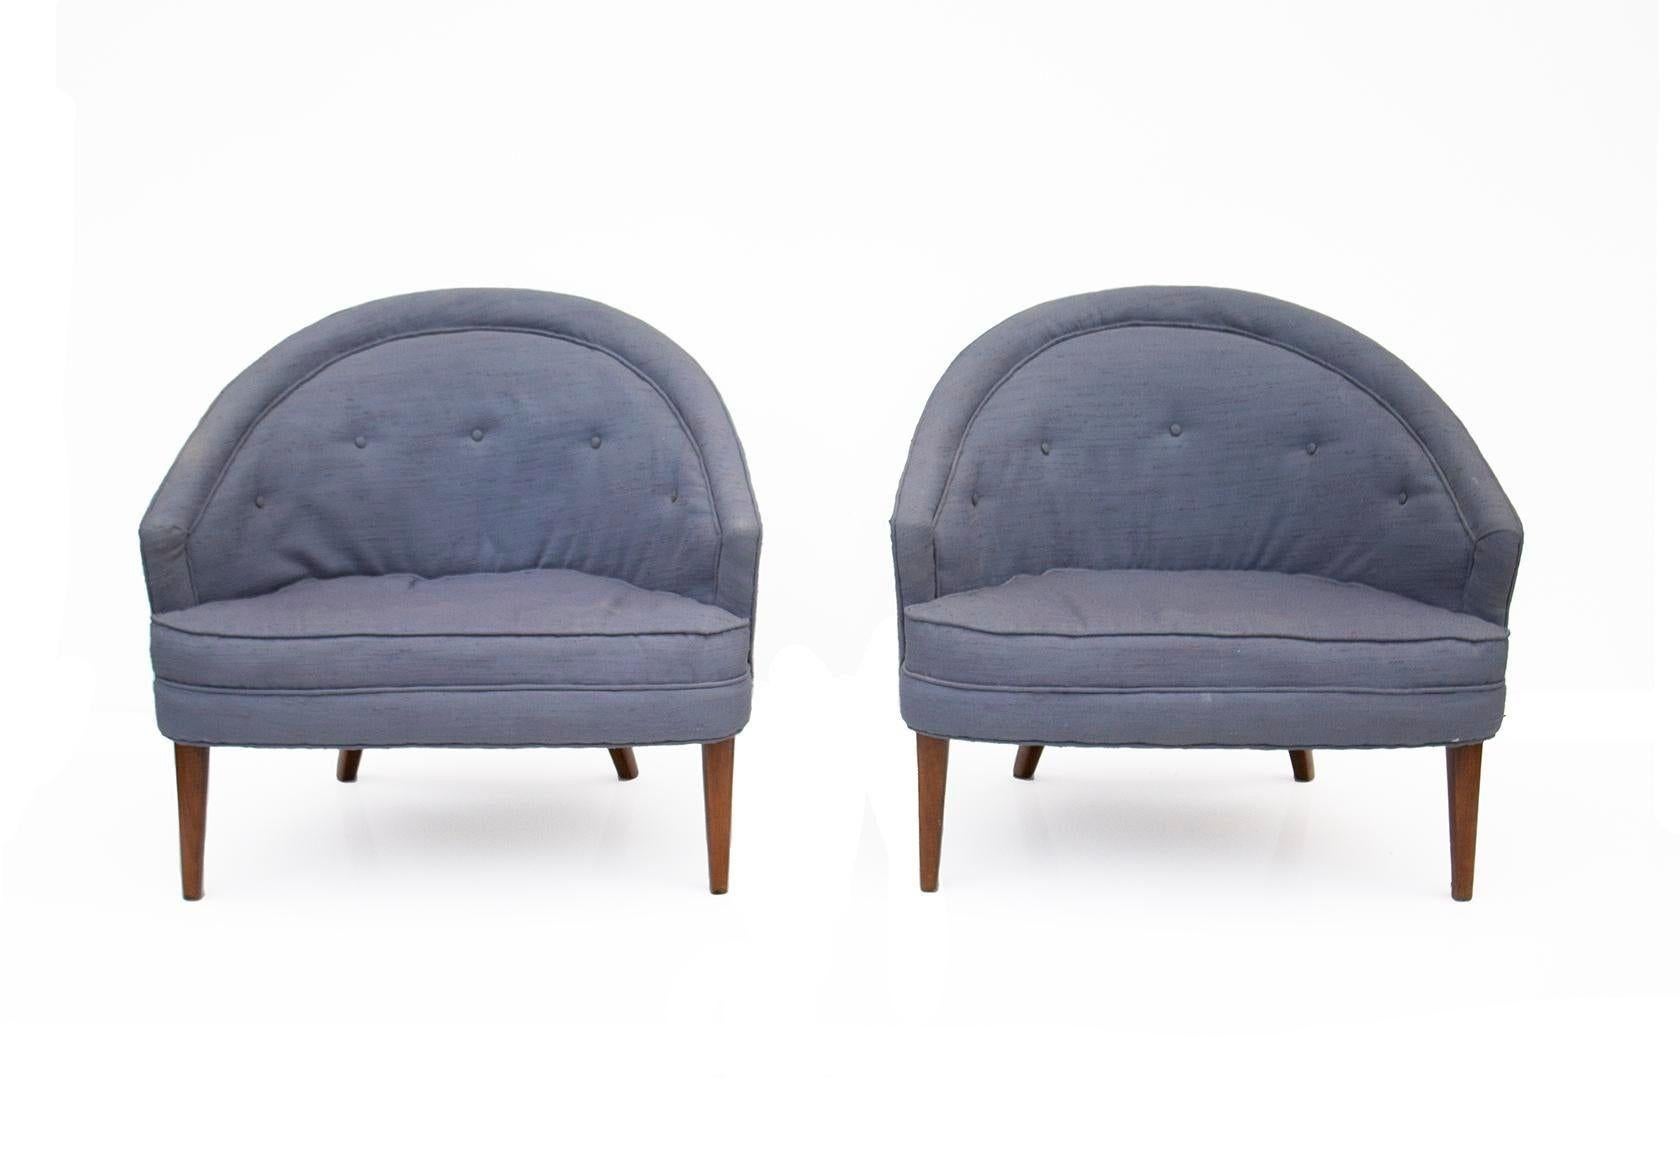 American Petite Pair of Tufted Mid-Century Armchairs For Sale